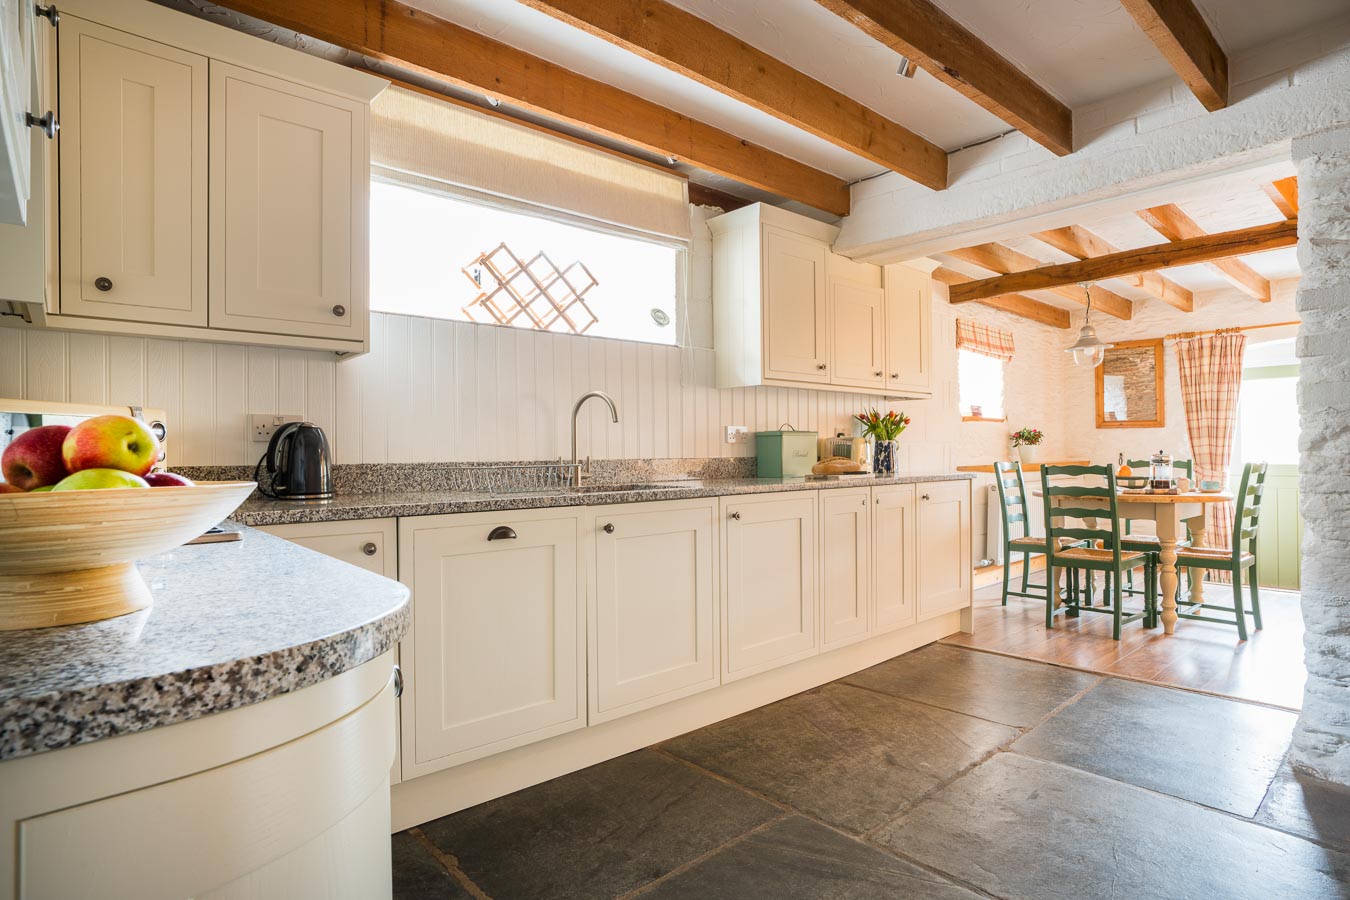 The stylish cream kitchen with granite worktops and slate floor Quarry cottage Flear Farm.